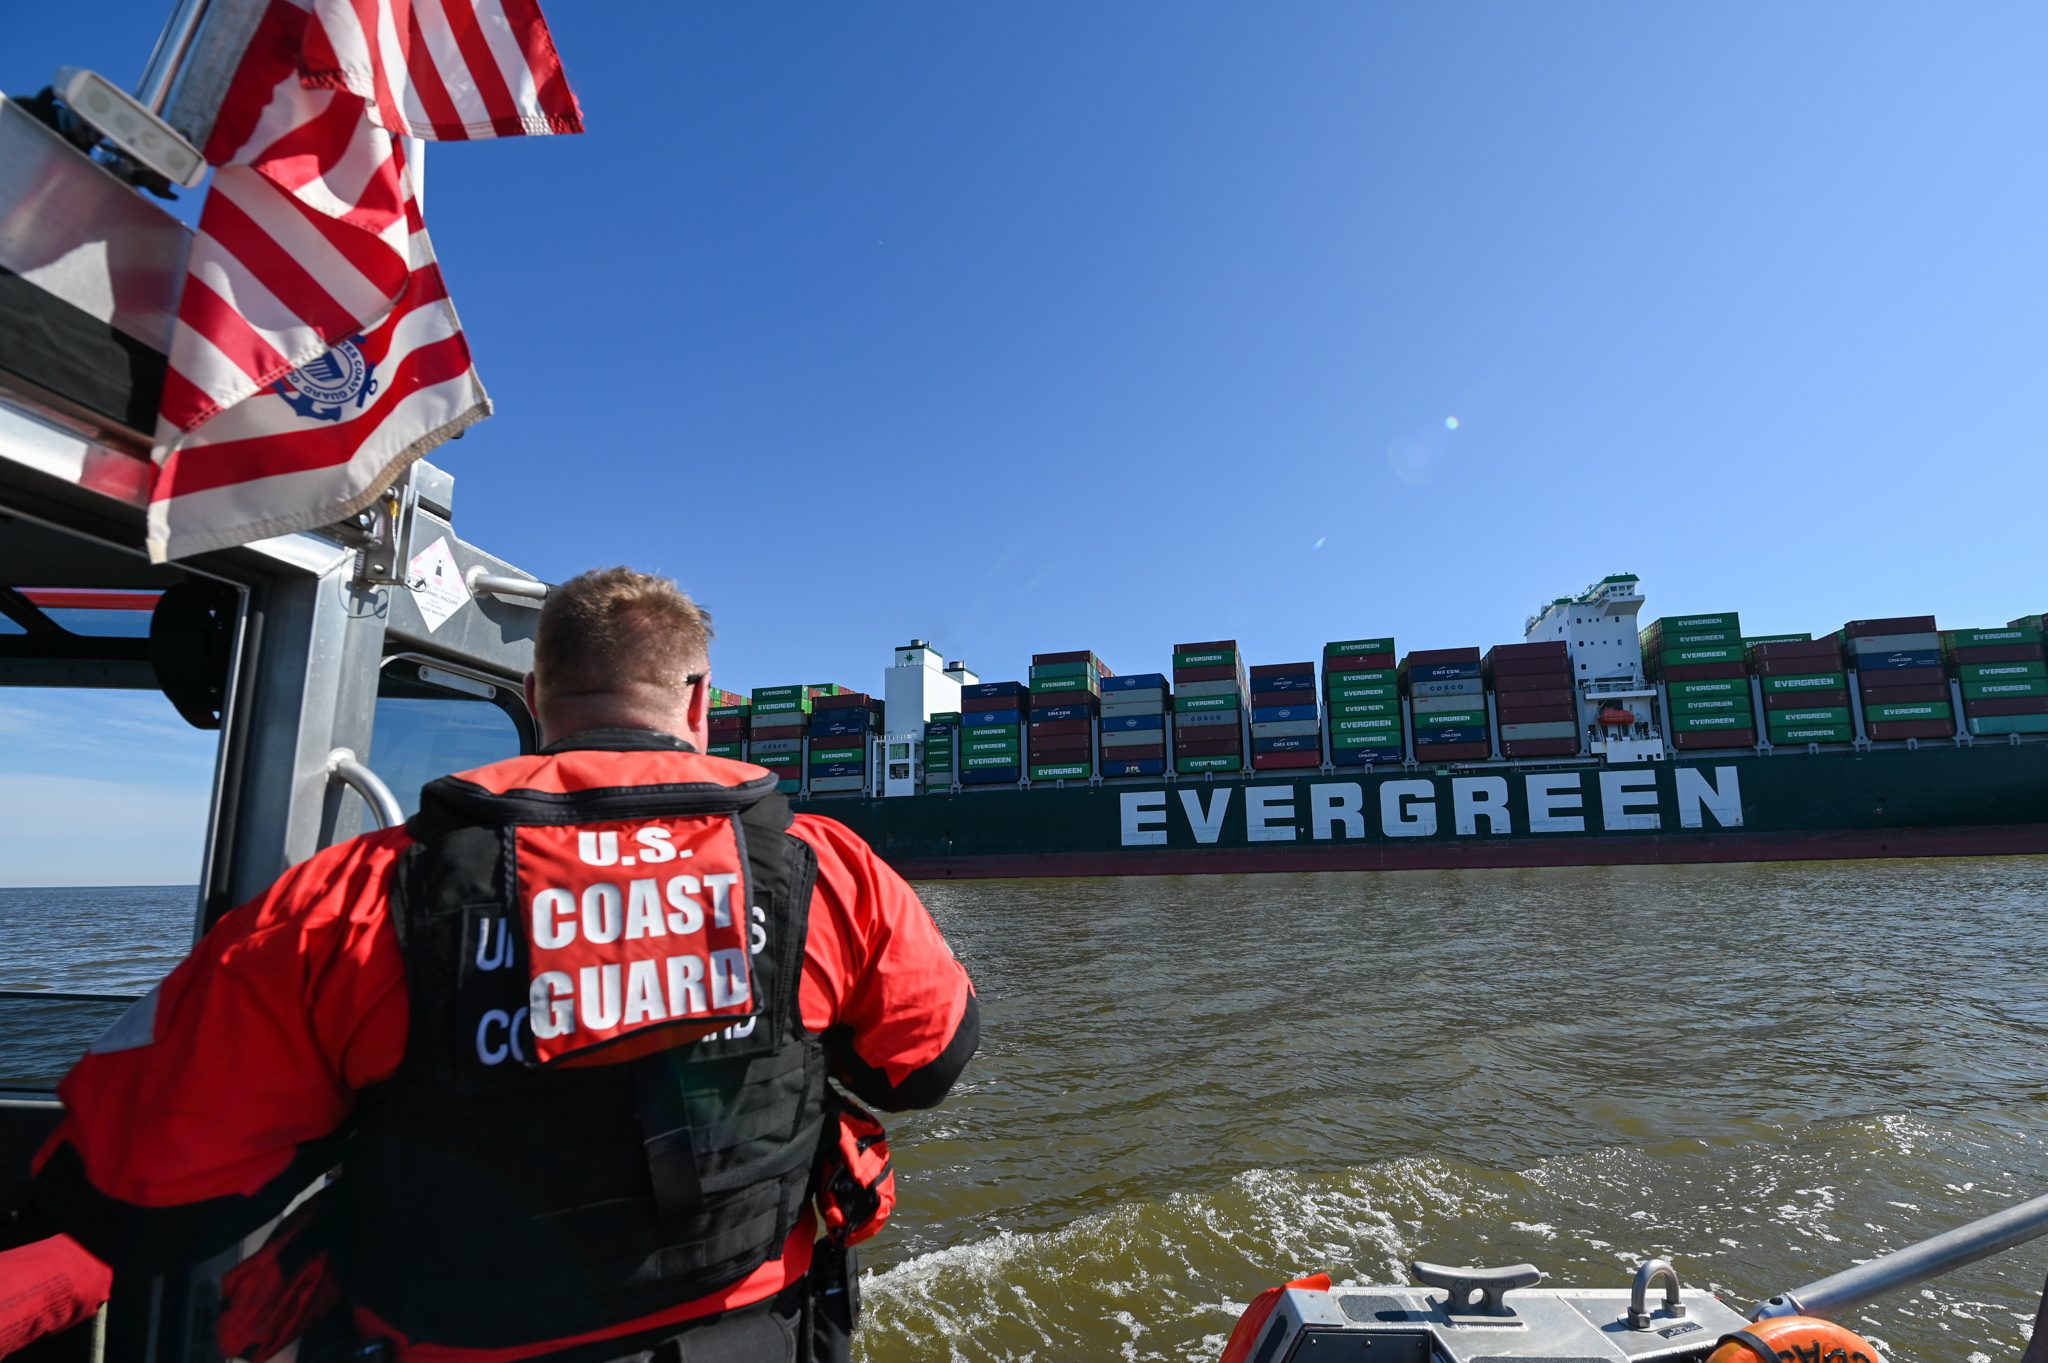 Evergreen Containership Aground in Chesapeake Bay